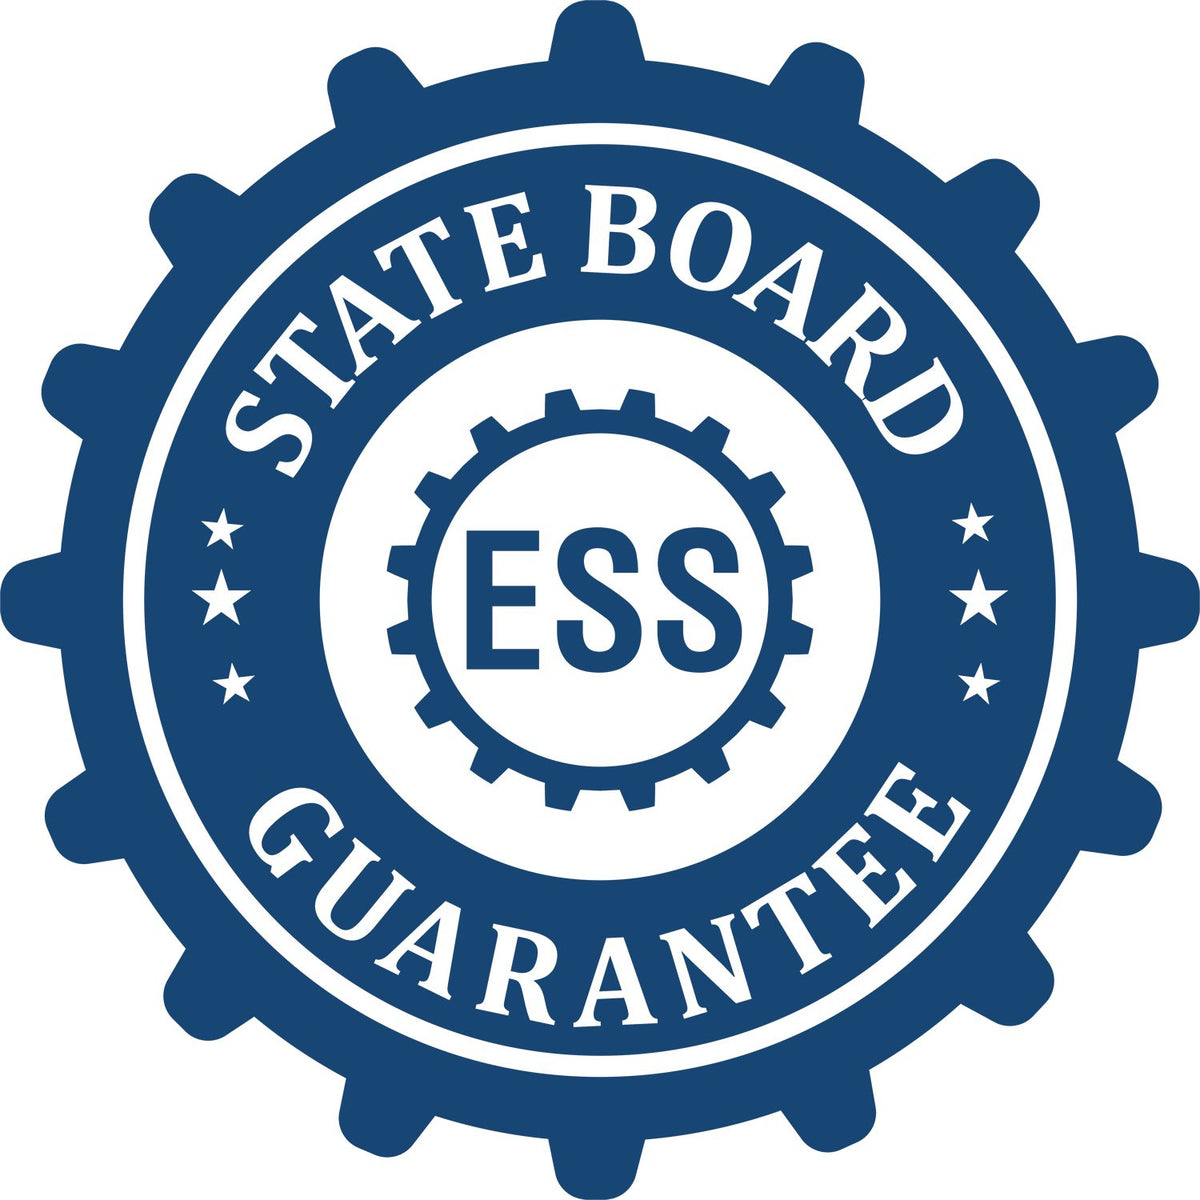 An emblem in a gear shape illustrating a state board guarantee for the Premium MaxLight Pre-Inked Kentucky Landscape Architectural Stamp product.